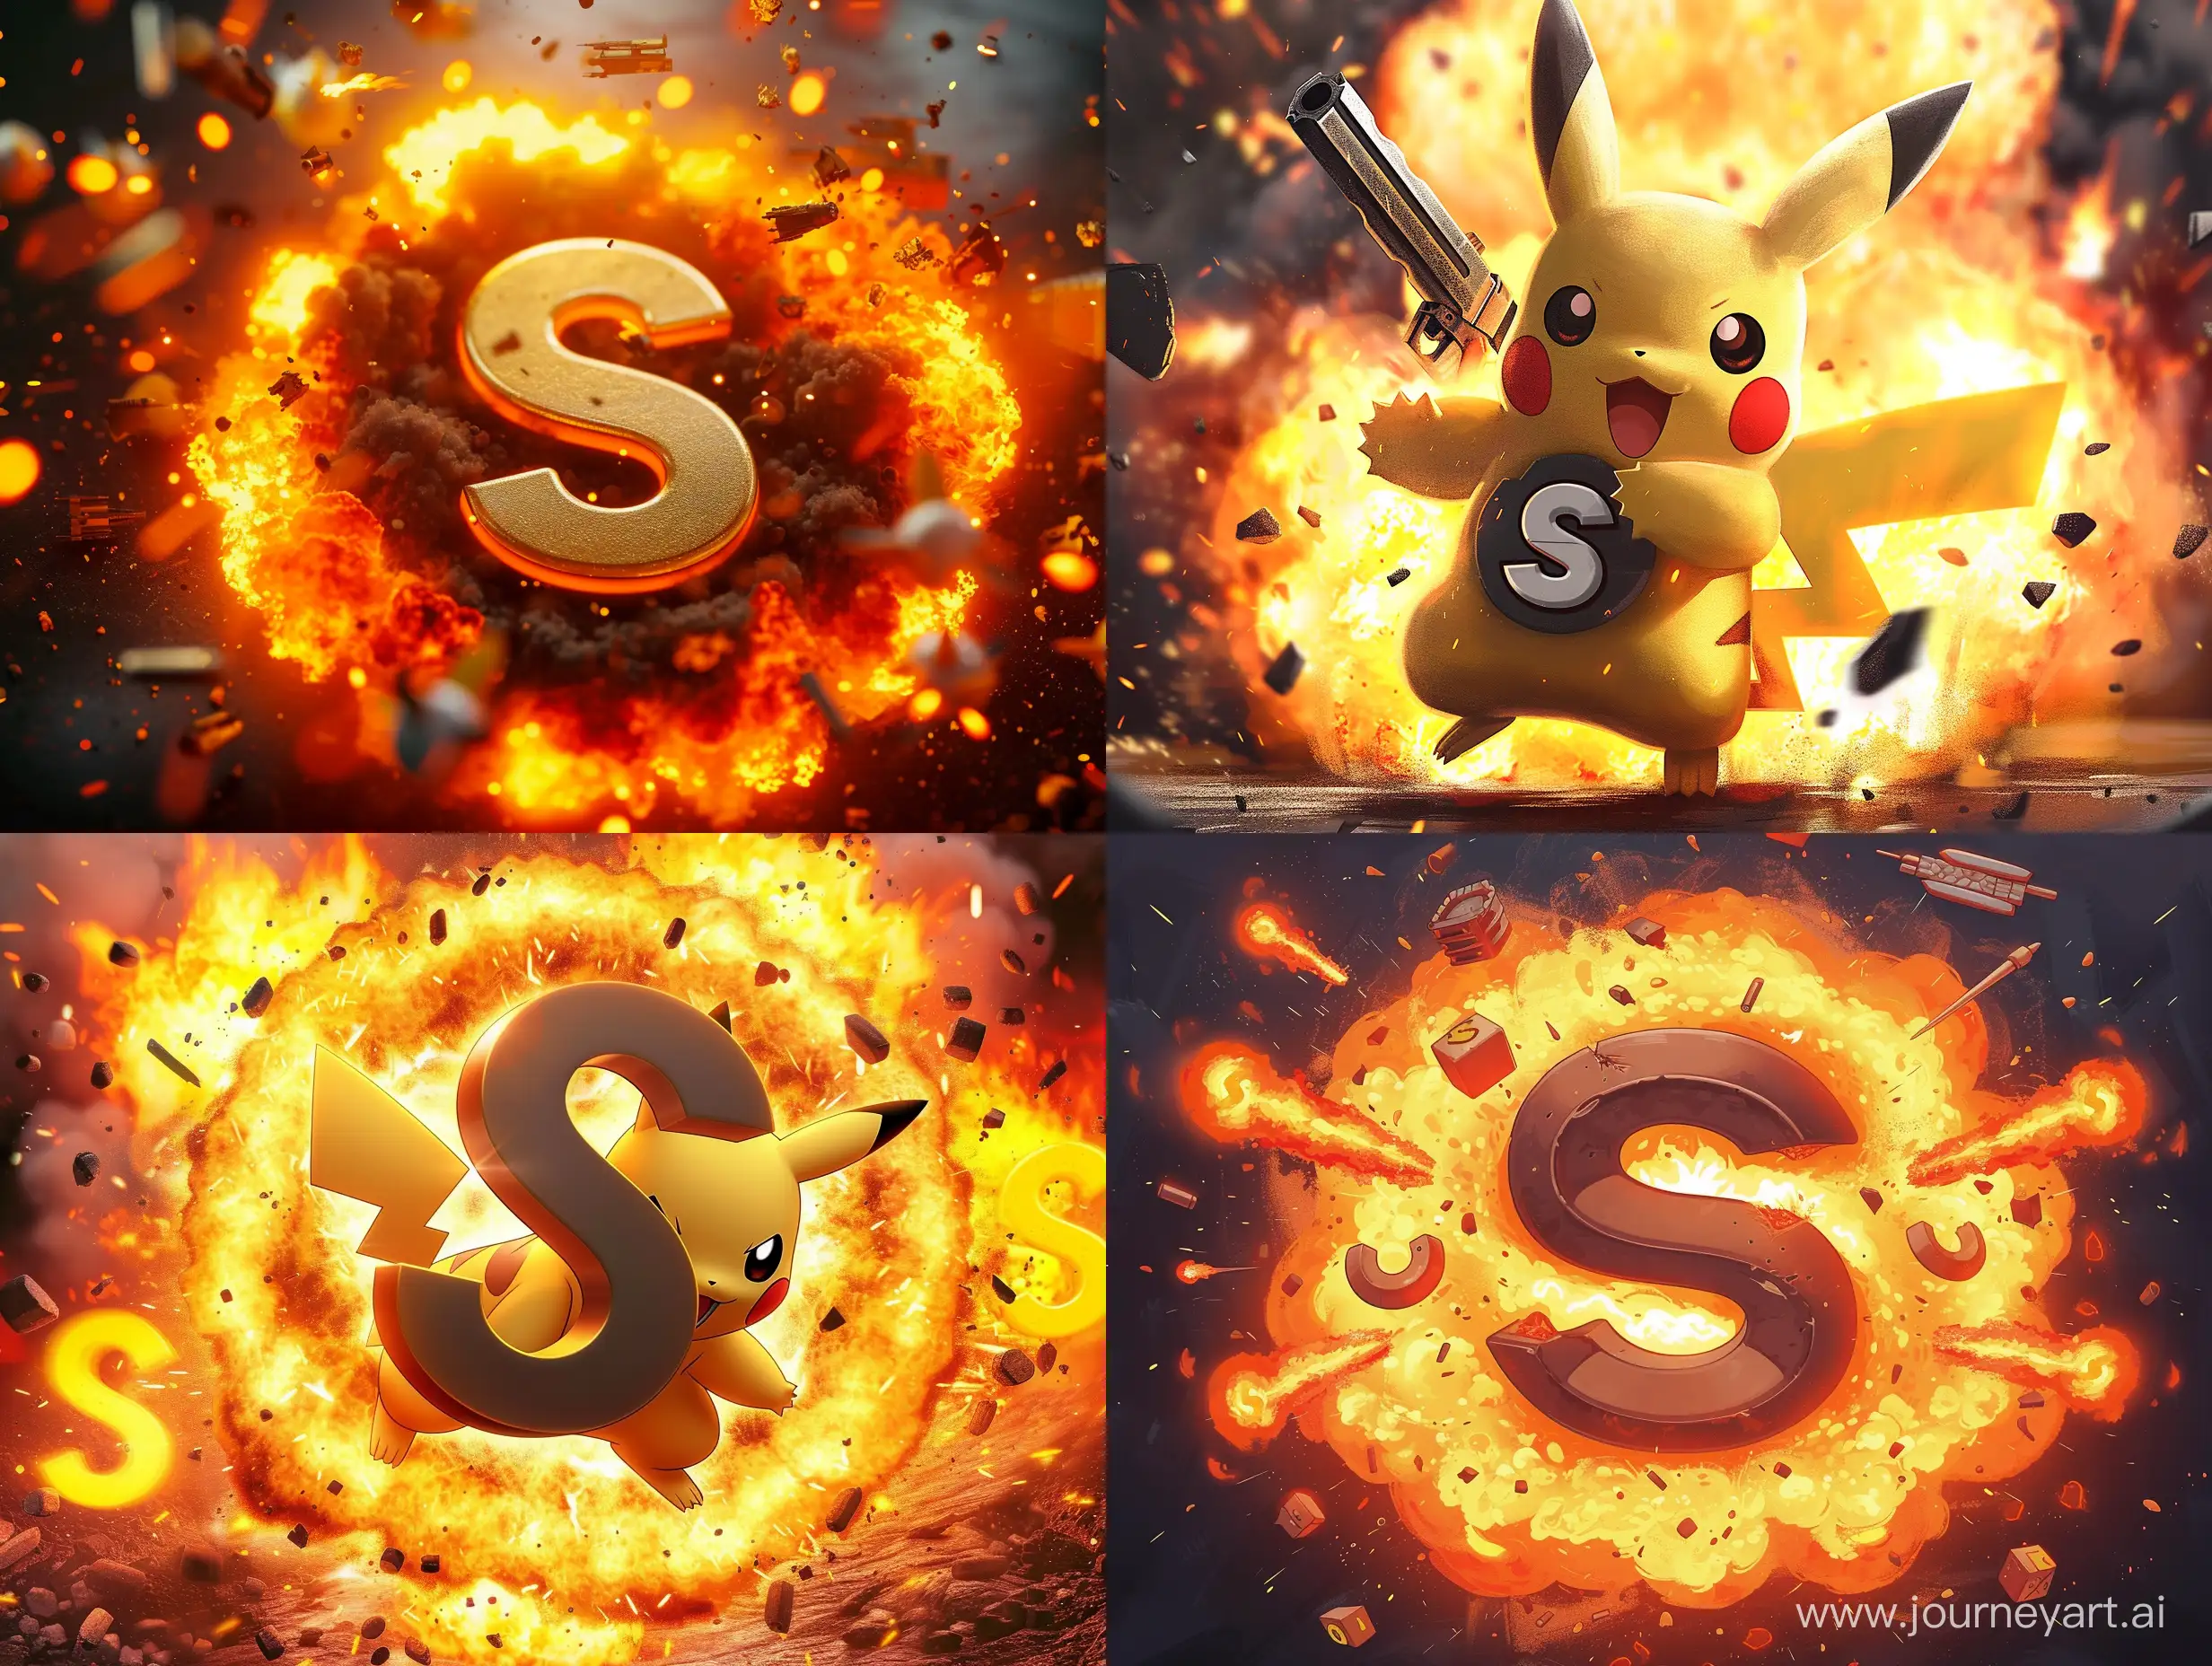 Dynamic-Pokemon-Battle-with-SLetter-Weapons-Amid-Explosions